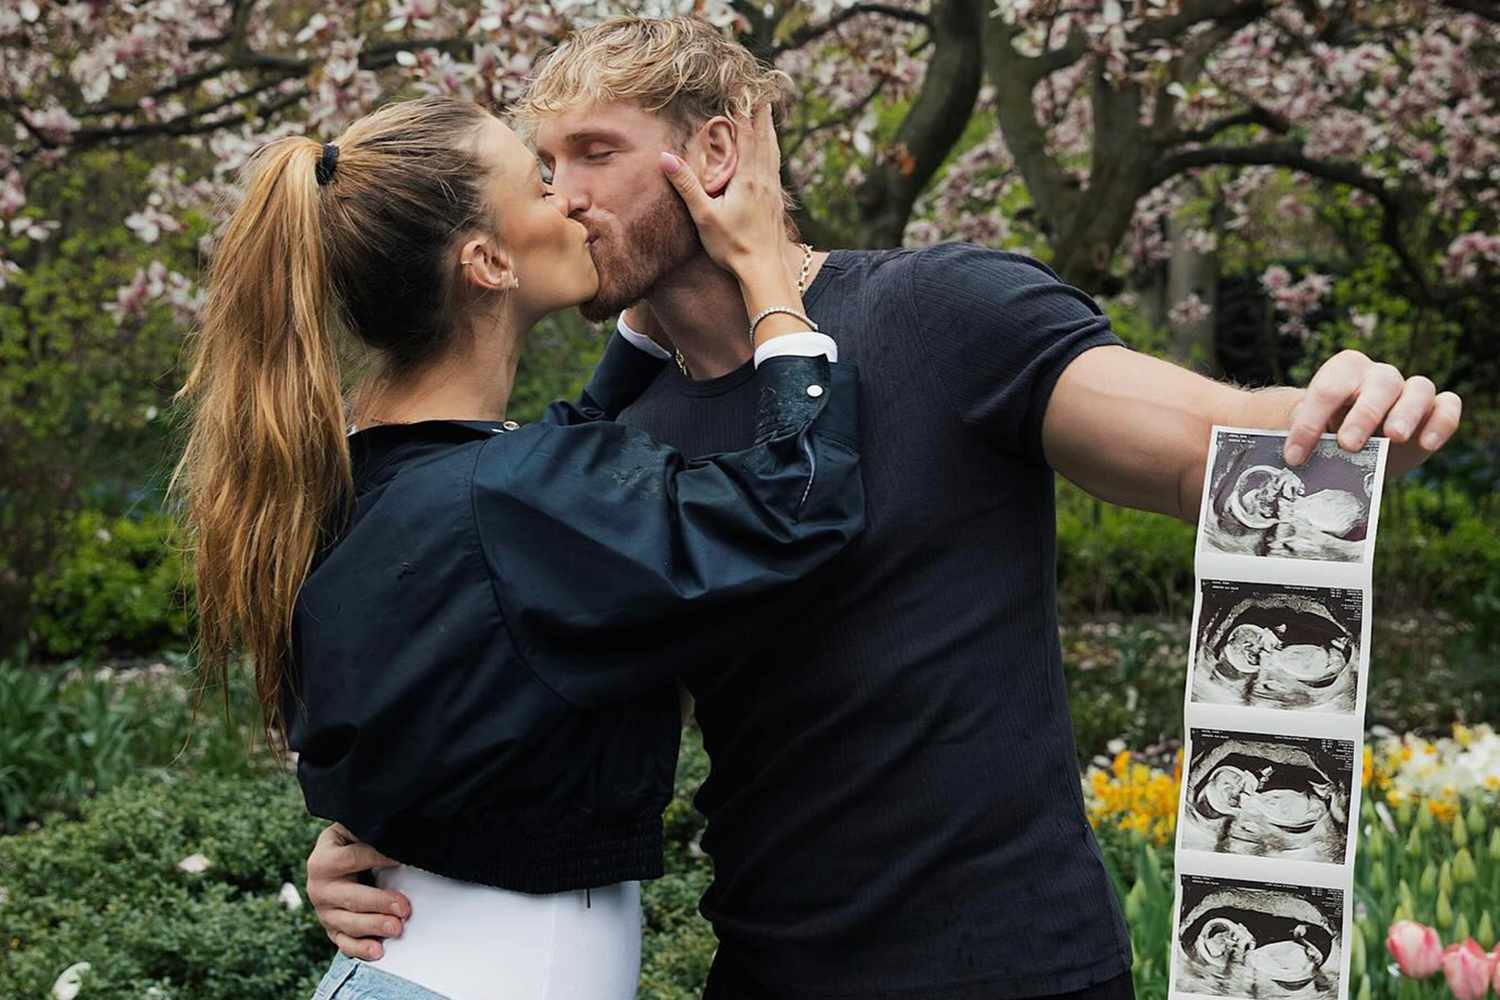 Logan Paul and Nina Agdal Engage in Wrestling Match at Gender Reveal Party – Exclusive Footage